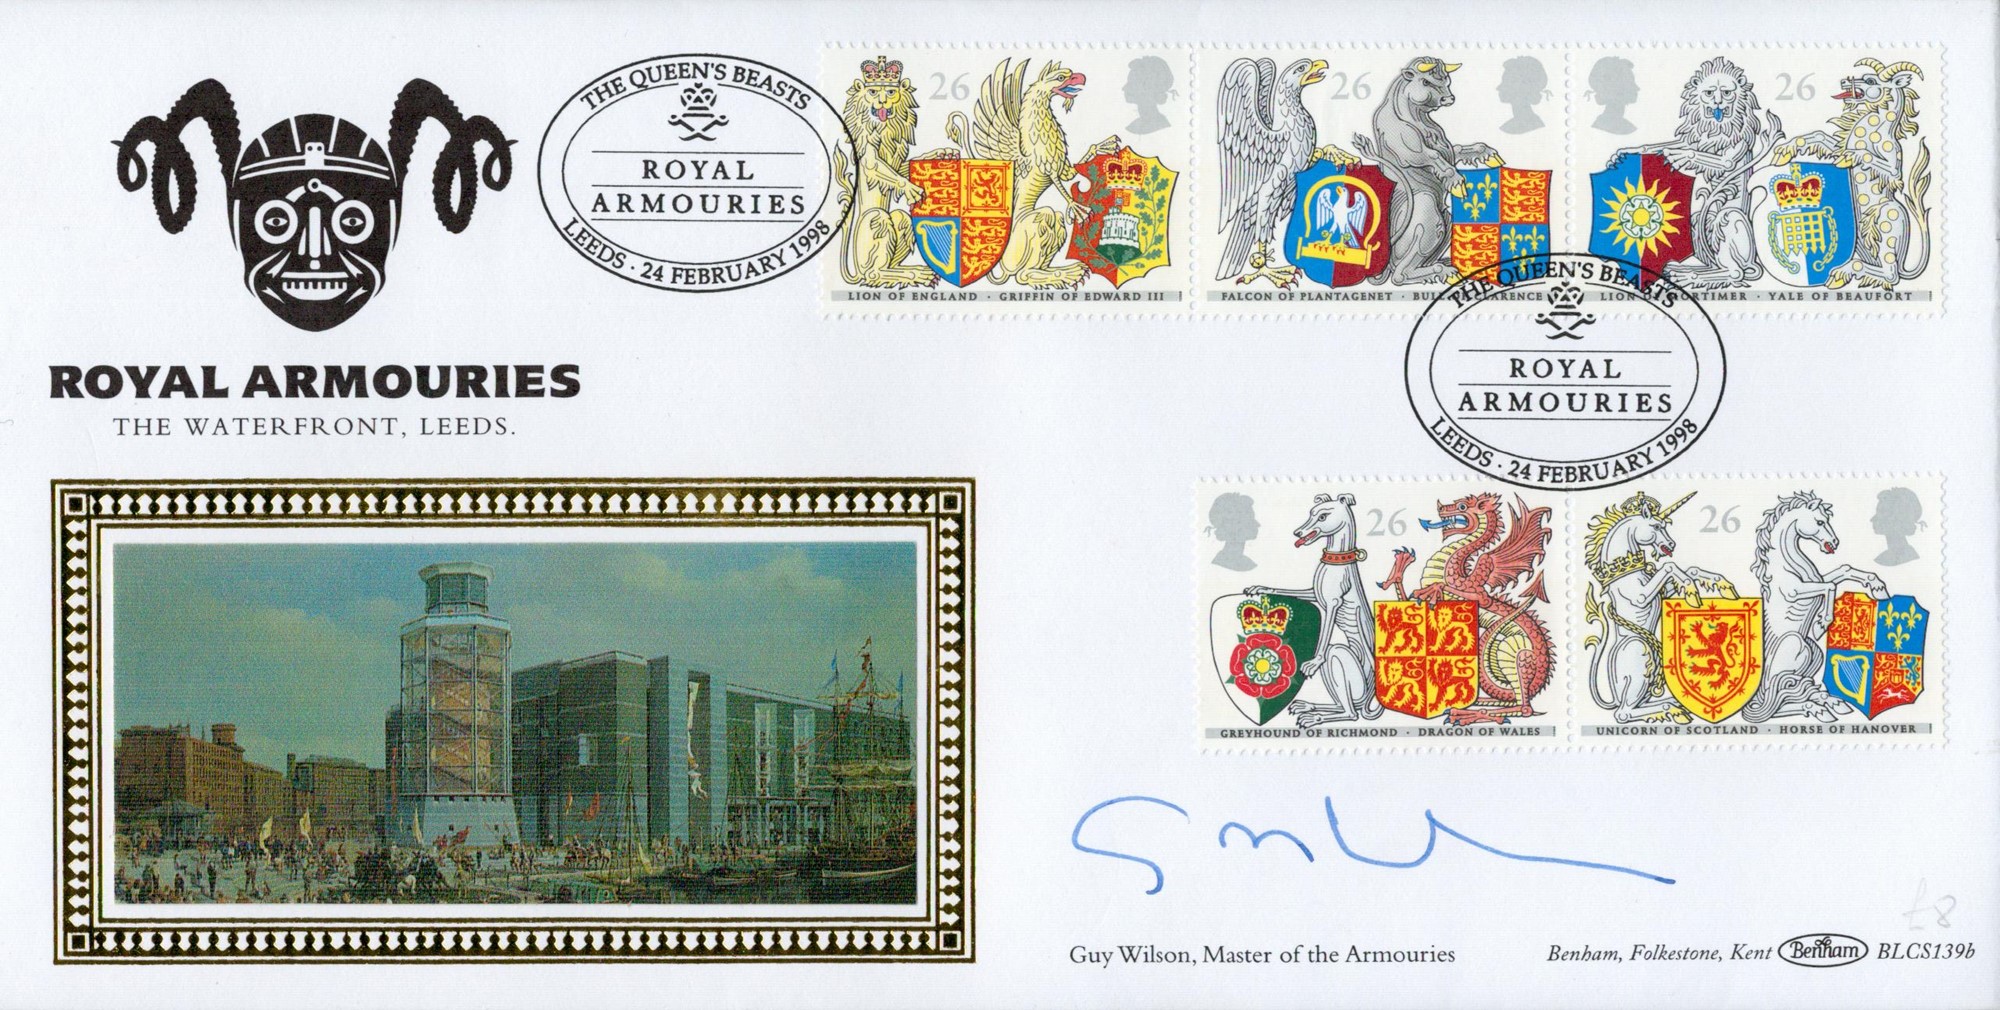 Guy Wilson signed Benham cover commemorating Royal Armourie4s, The Waterfront, Leeds. This beautiful